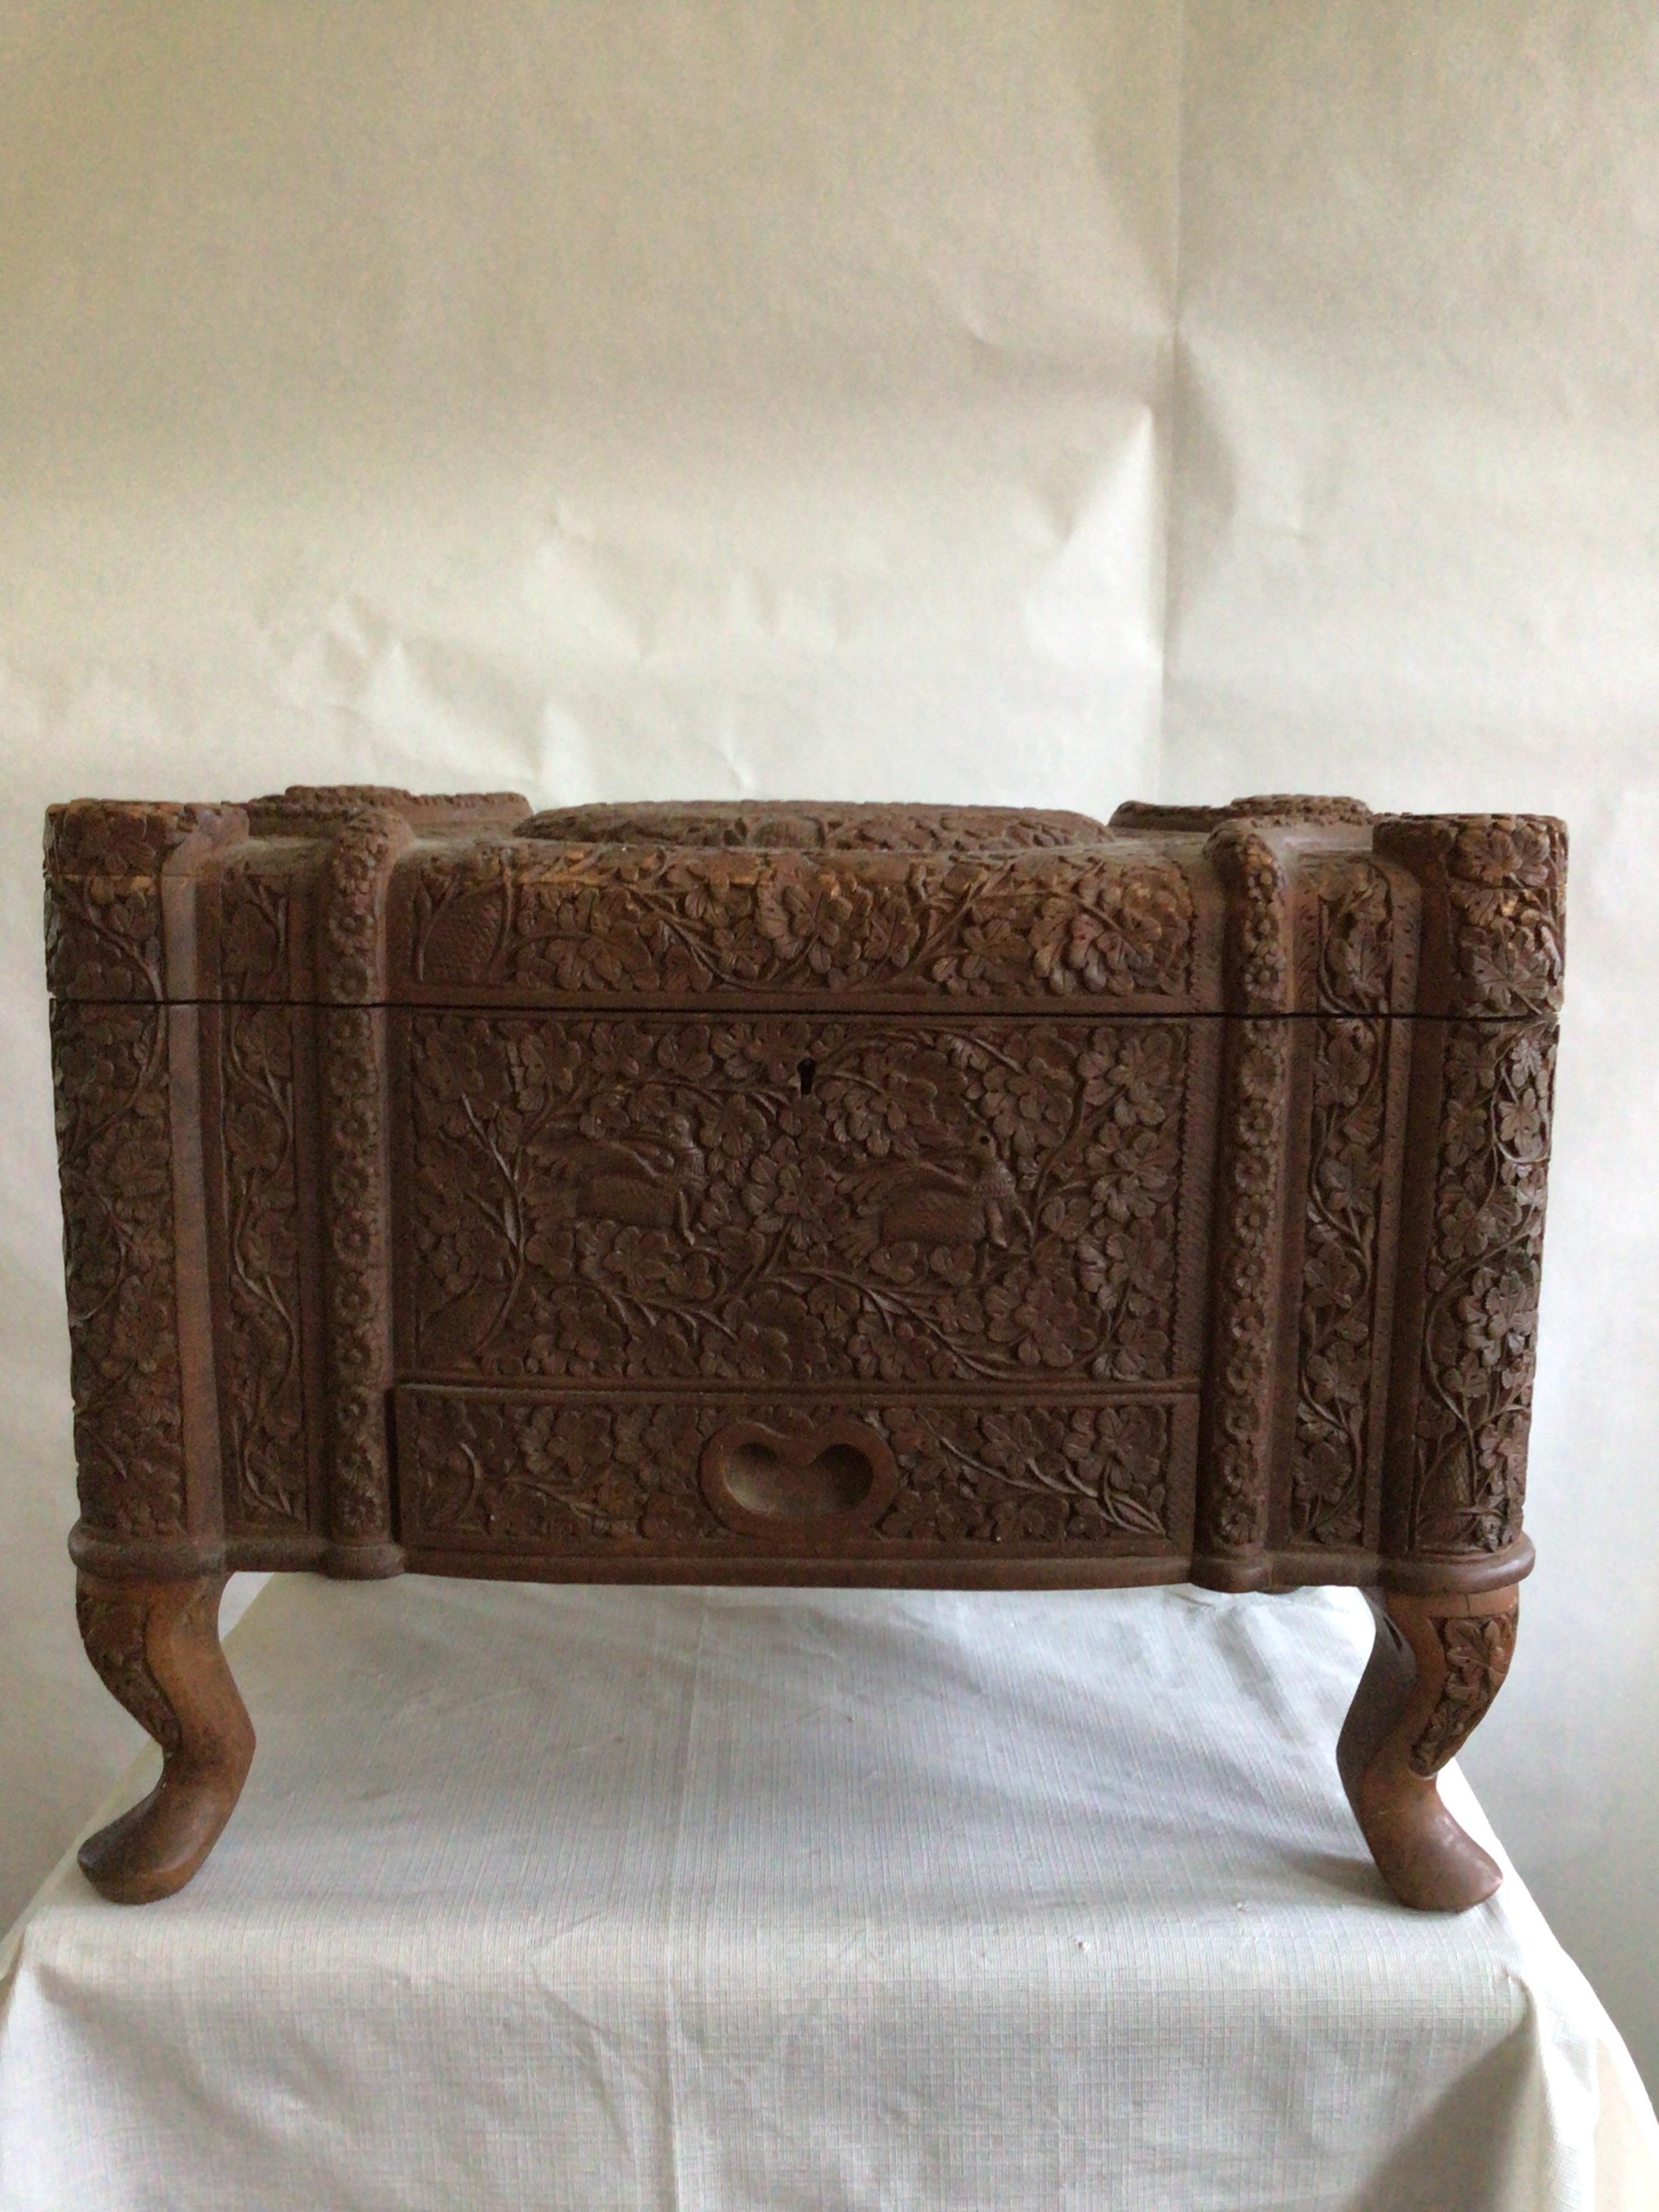 1950s Fine And Densely Carved Anglo-Indian Style Box
Drawer at outside base of box
South-Indian or Anglo-Indian style
Lacking keys
Decoration adorned on all sides depicting birds amongst floral vines 
The top opening to reveal a plain interior, with